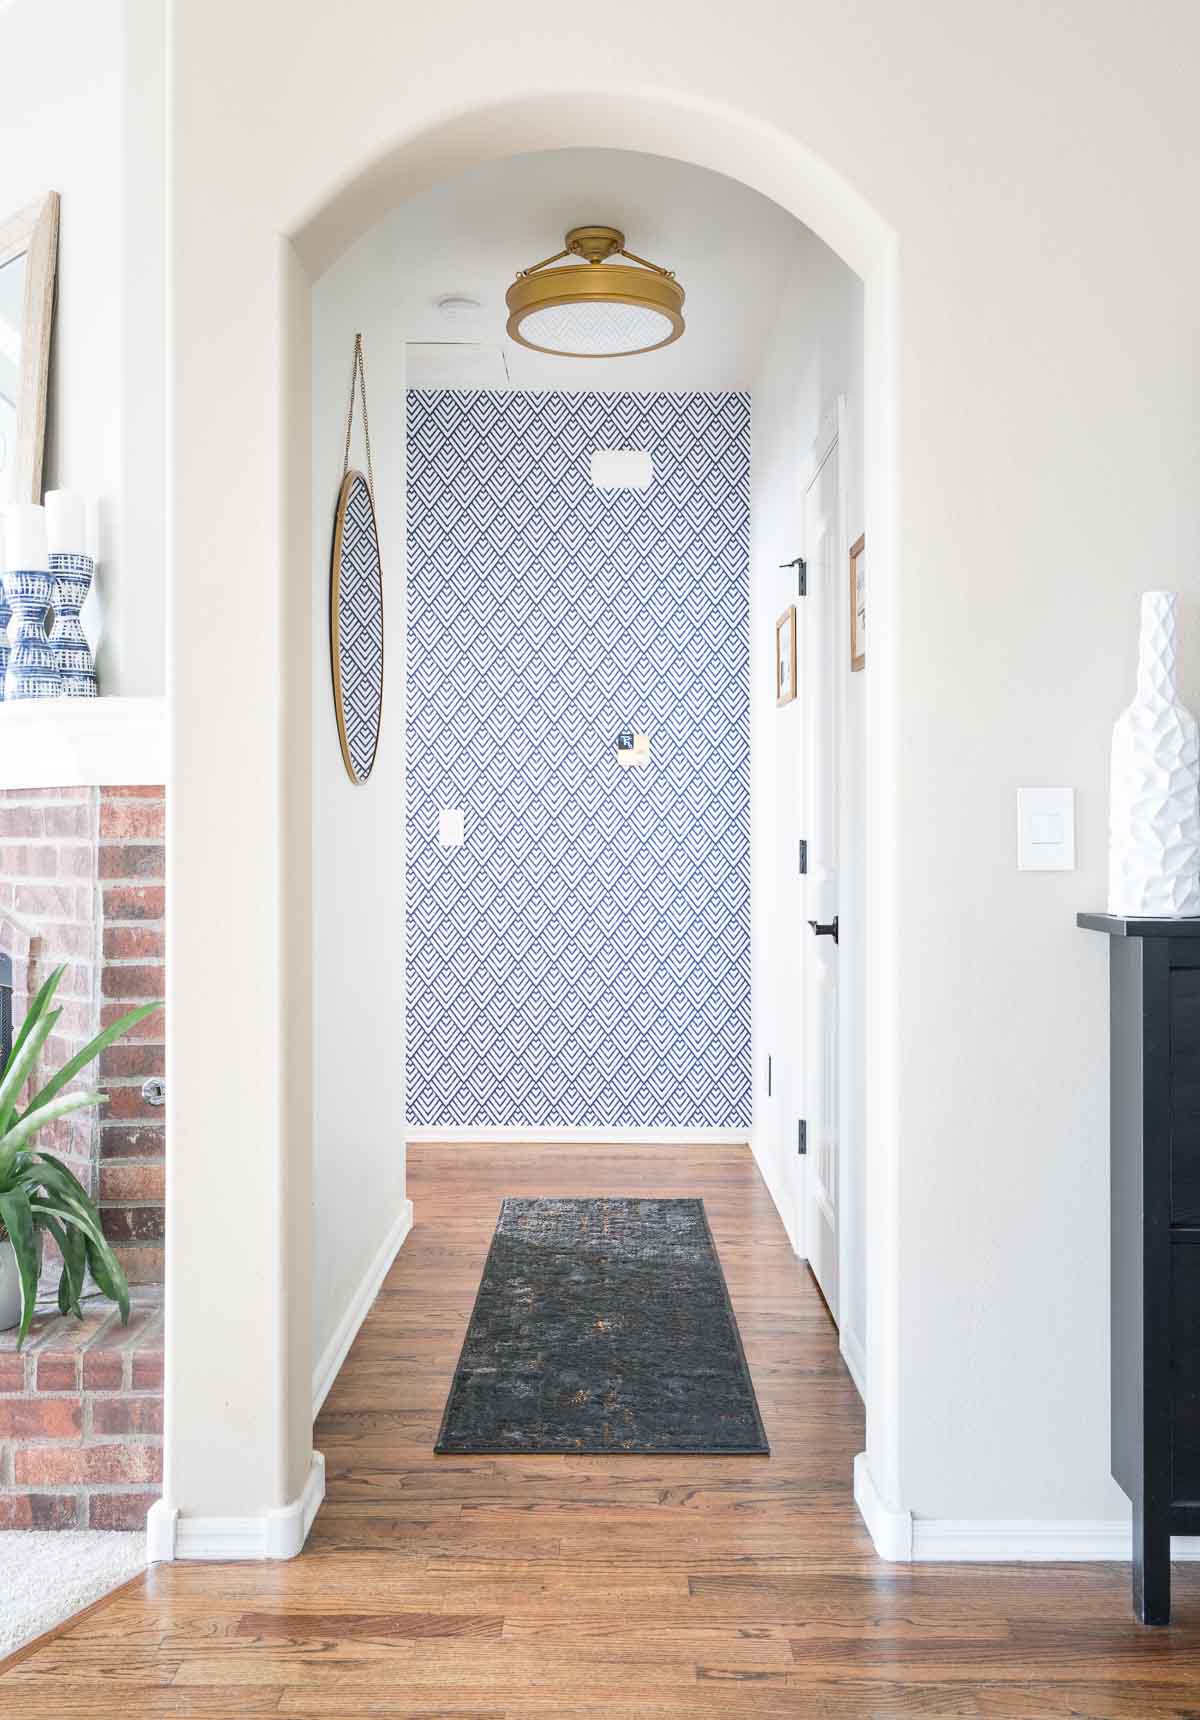 A small hallway with wallpaper in blue and white at the end.